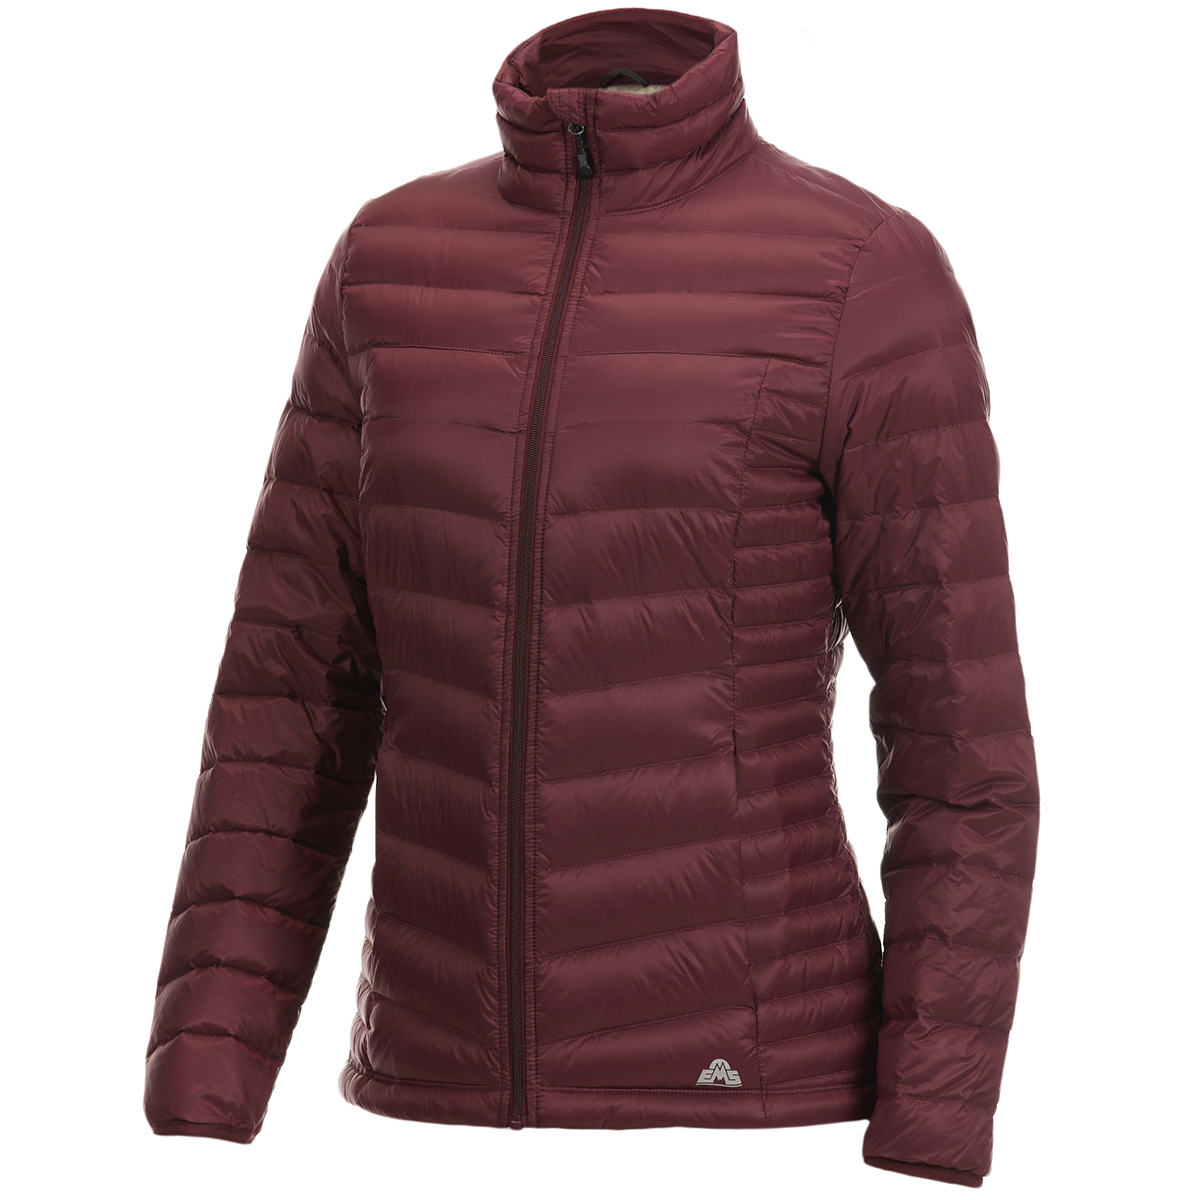 Ems Women's Featherpack Jacket